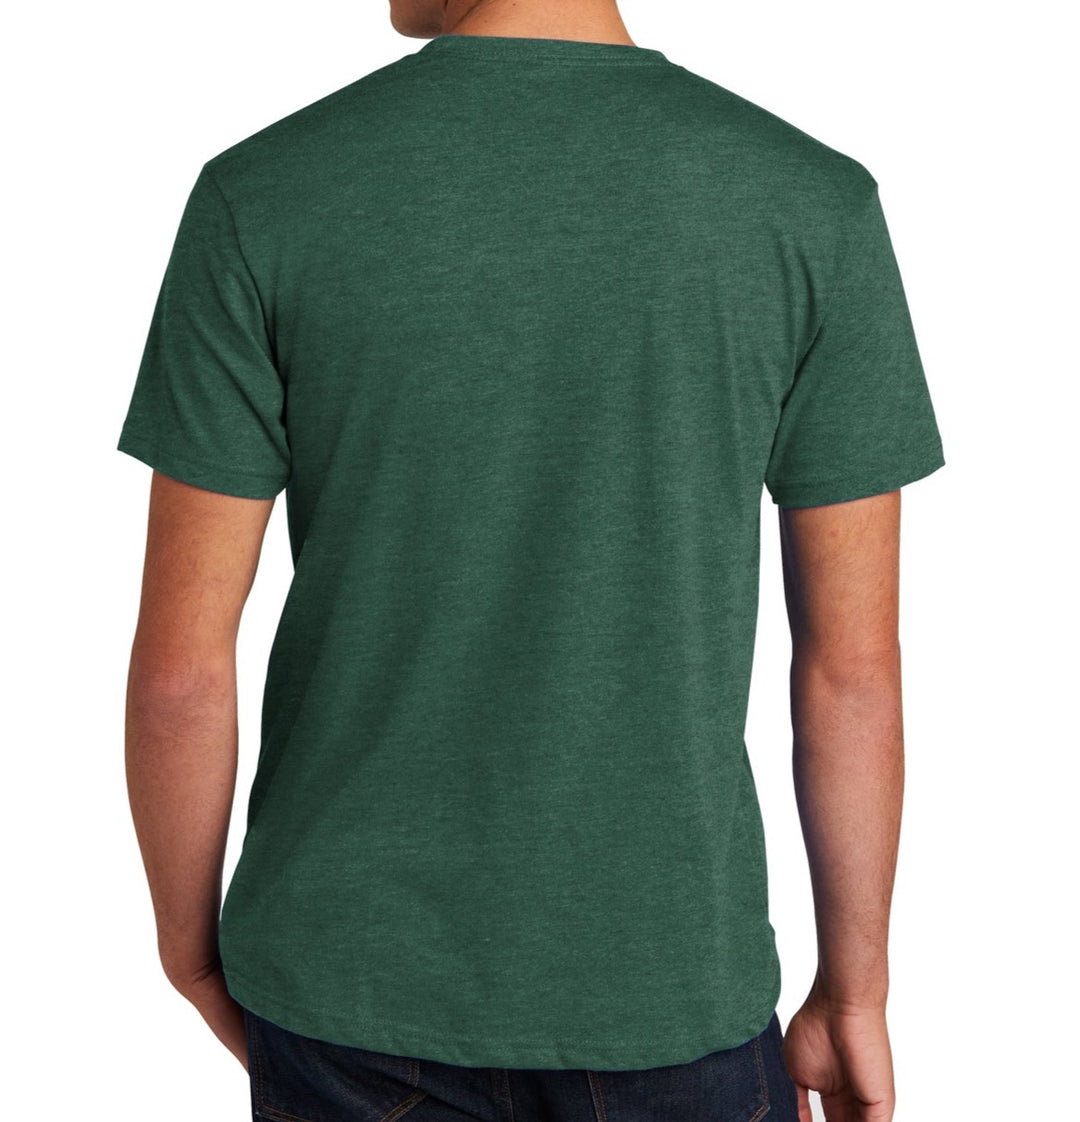 Michigan State Green T-Shirt Back of Shirt from Nudge Printing